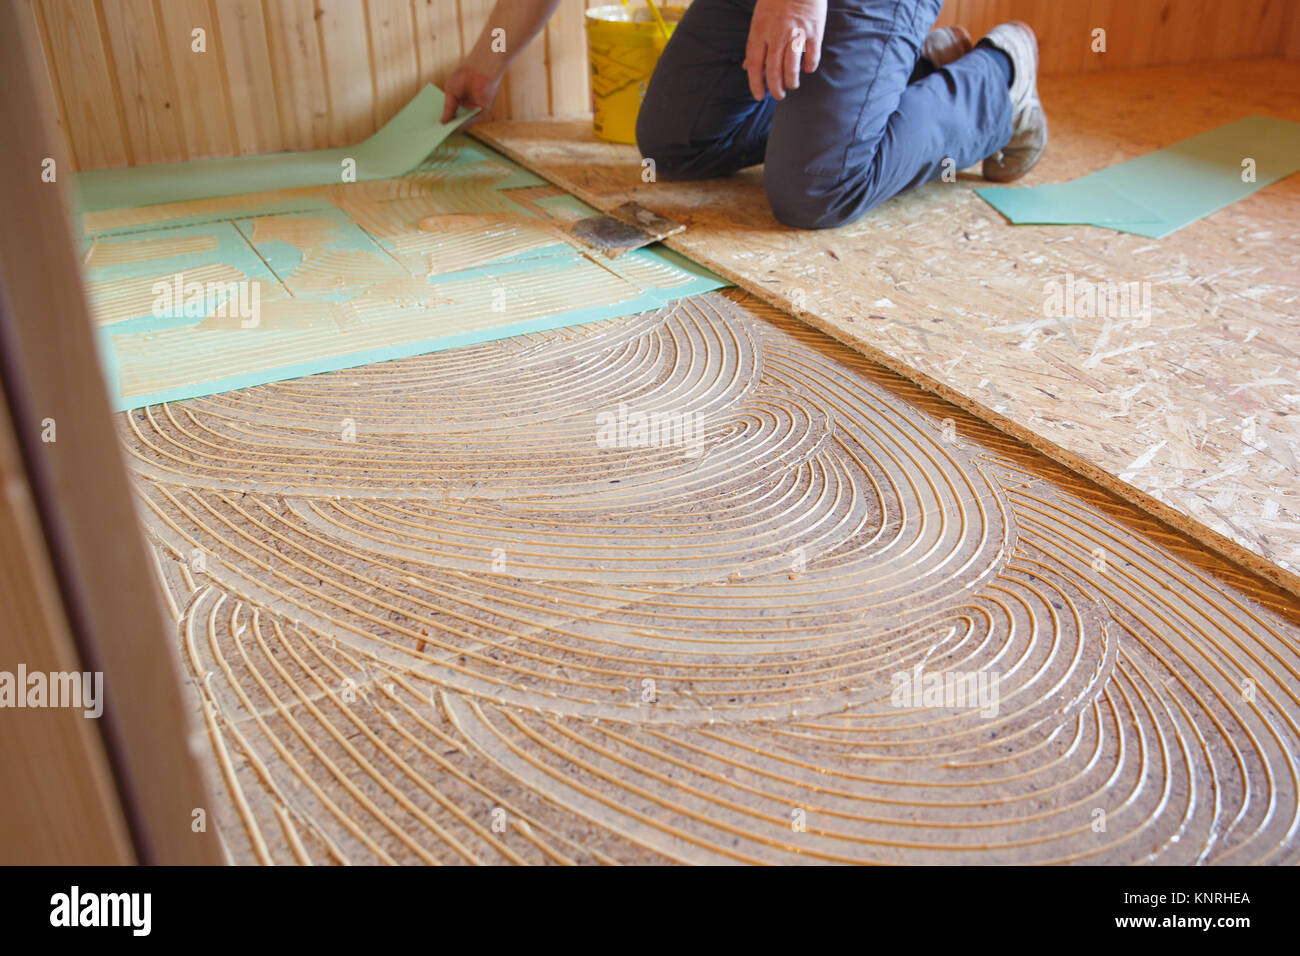 Worker laying insulation layer and adhesive primer spread on the old floor, prepared for laying of new flooring. Professional work, home improvement a Stock Photo